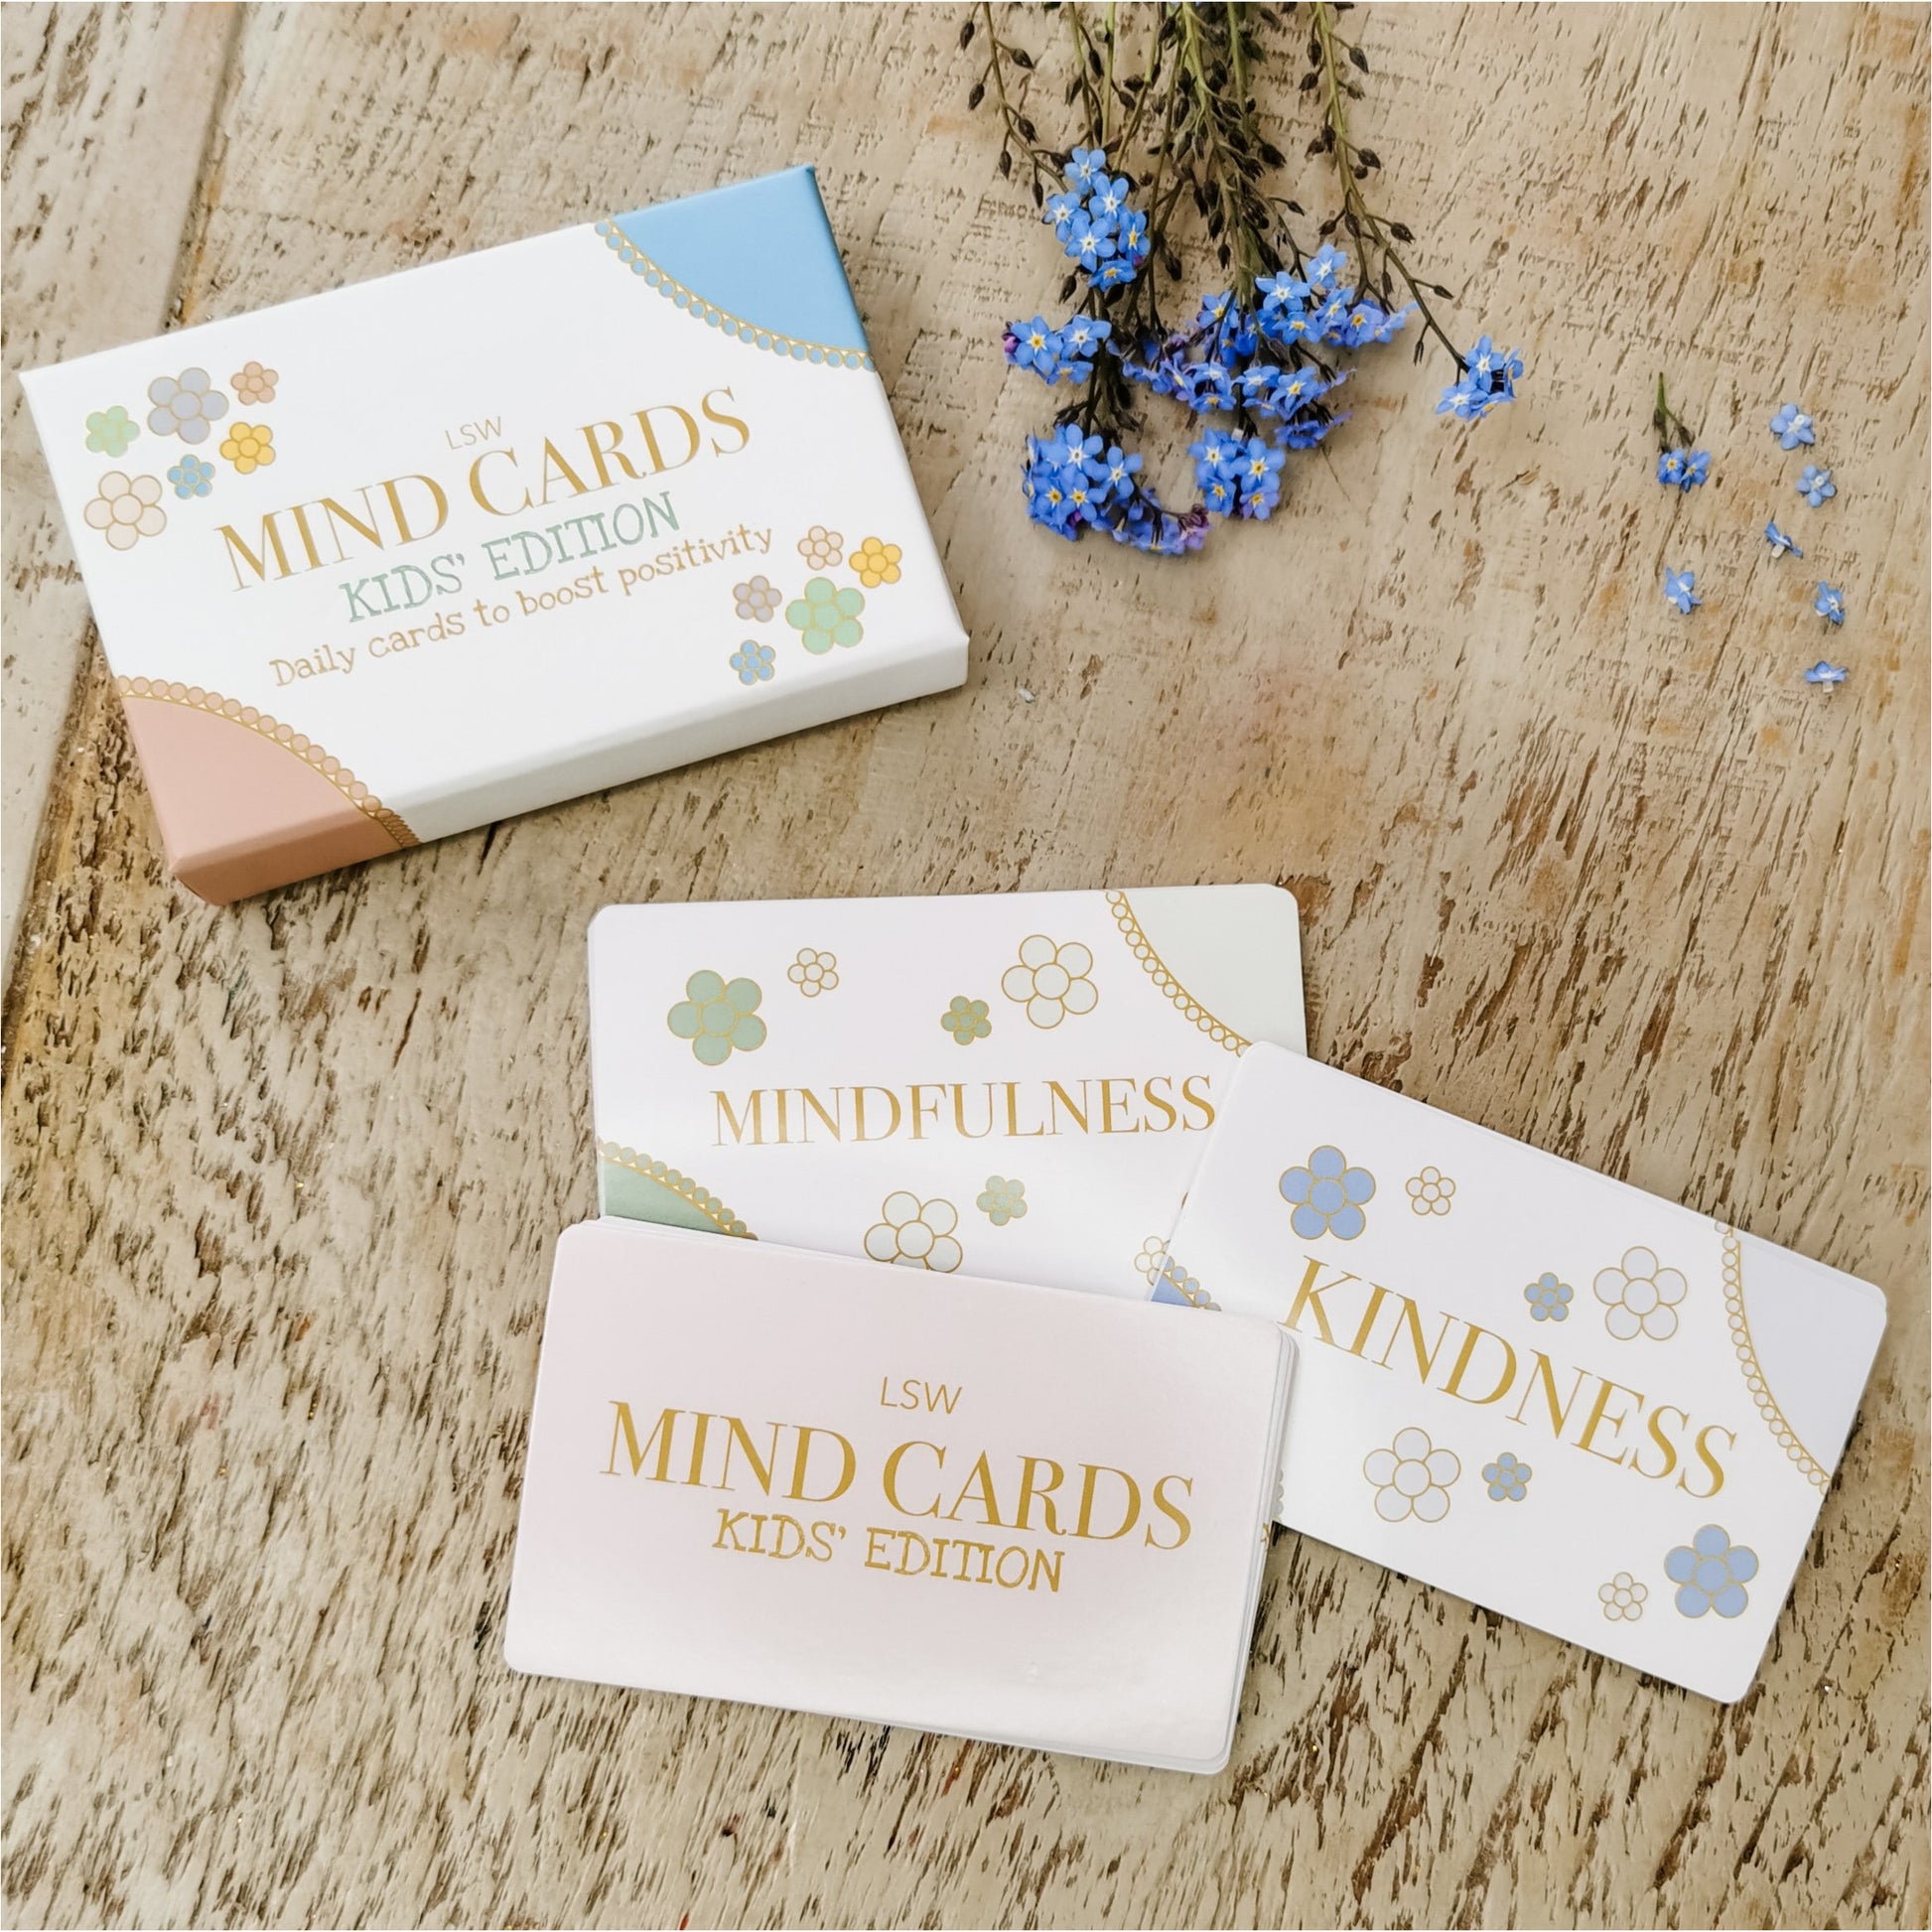 LSW Mind Cards: Kids' Edition. Buy at Out of the Box Gifts